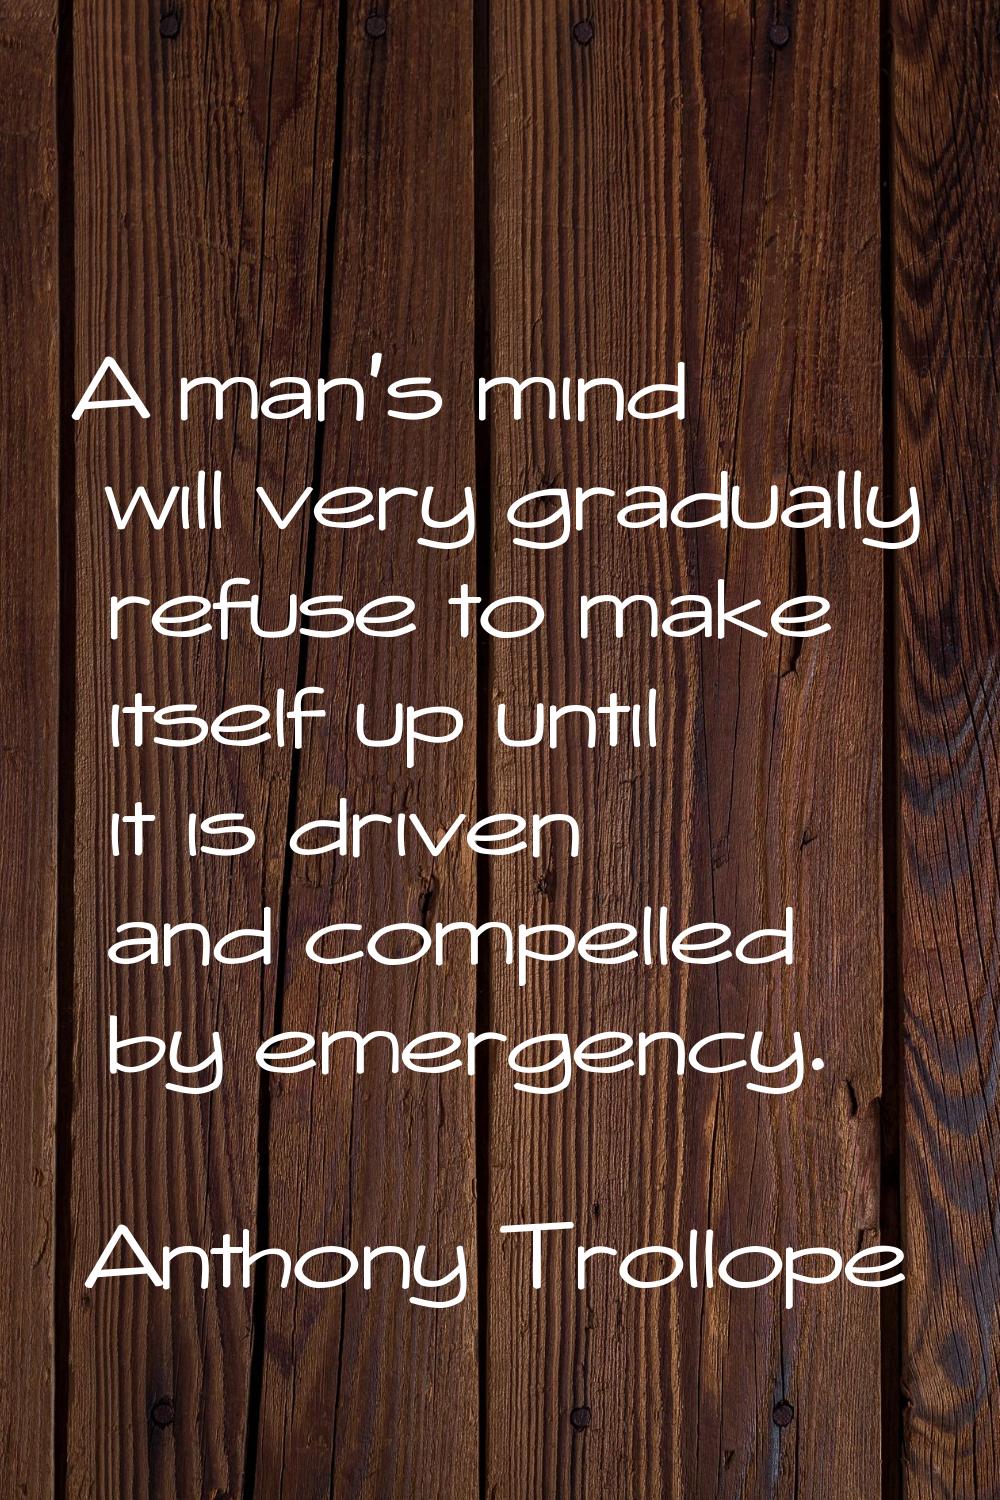 A man's mind will very gradually refuse to make itself up until it is driven and compelled by emerg